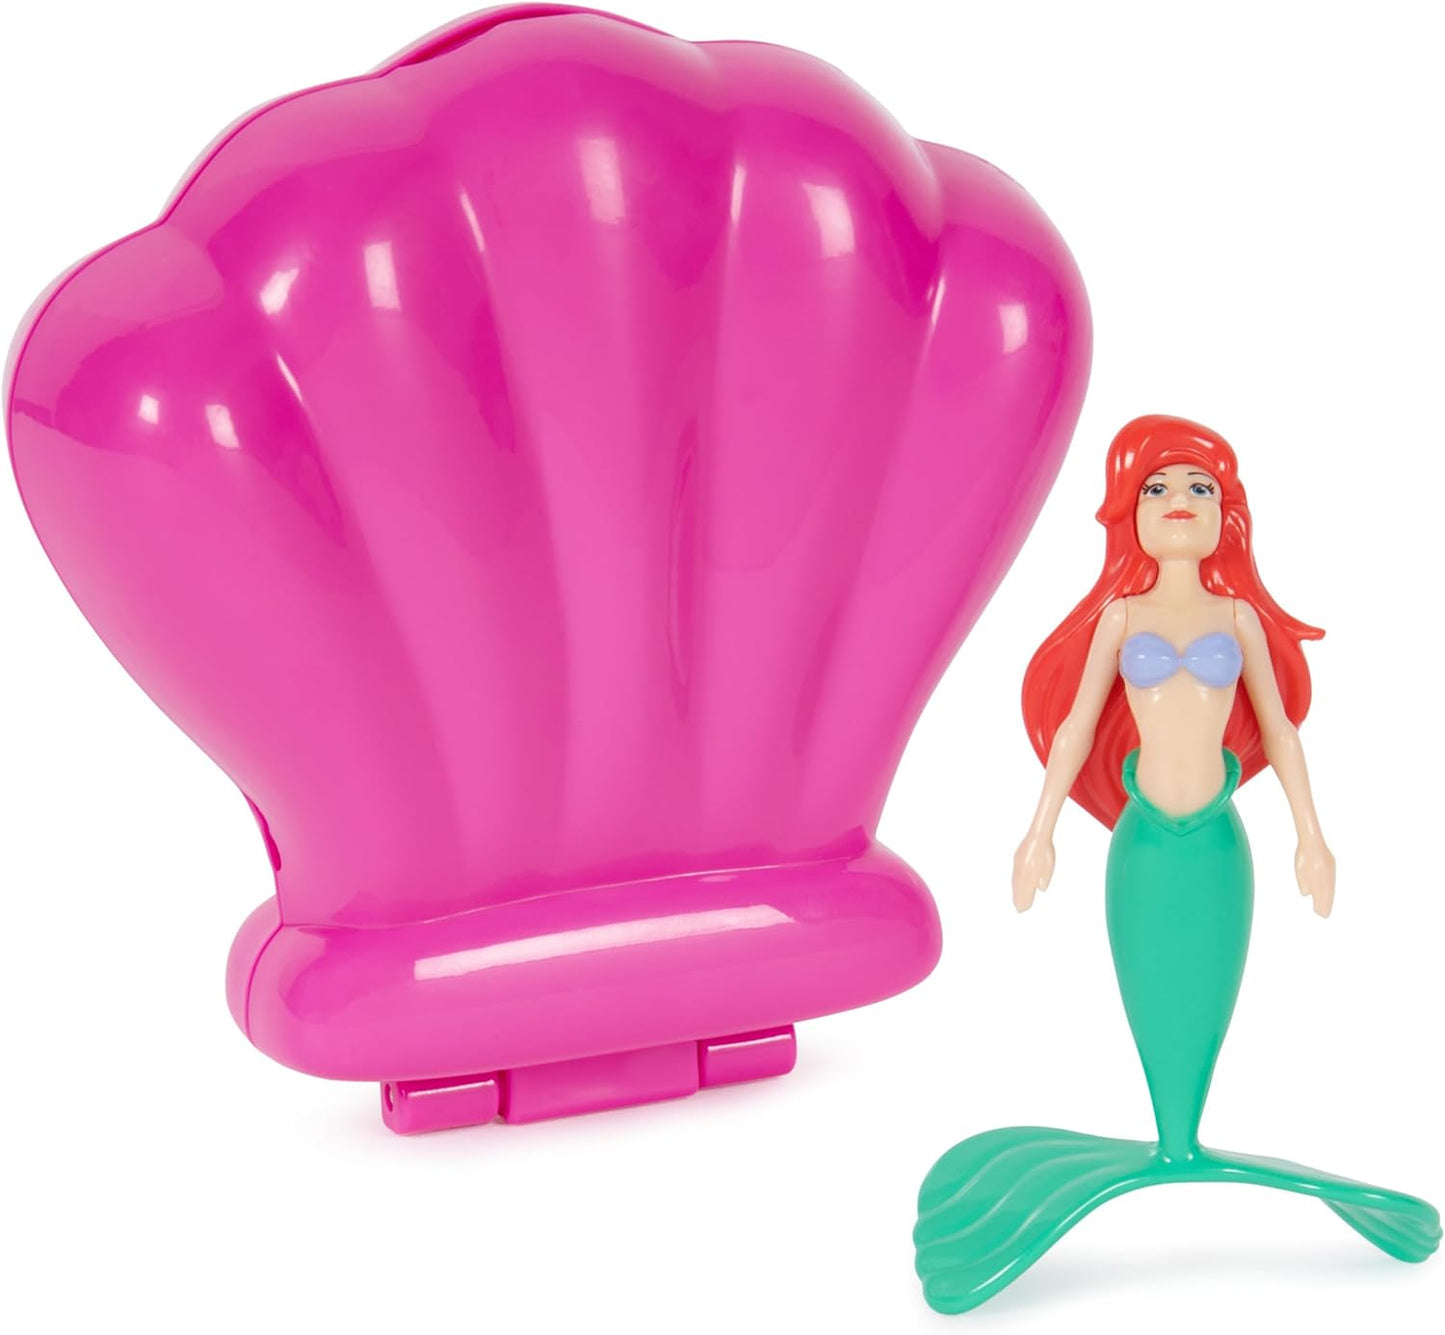 Disney Princess Ariel Inflatable Water Boat Vehicle for Kids